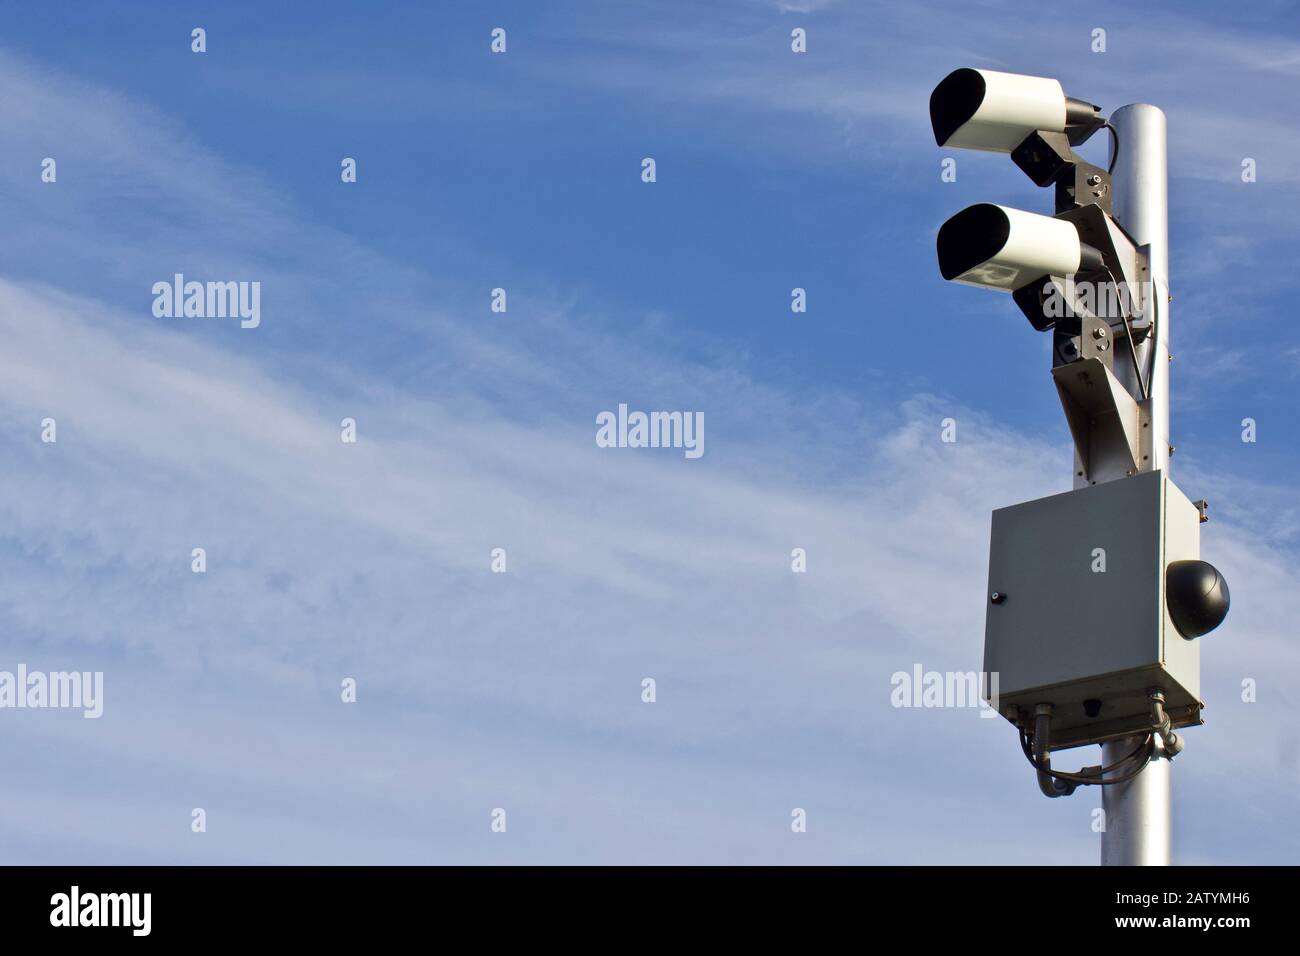 Automated License Plate Readers (ALPRs) automatically capture all license plate numbers that come into view, along with the location, date, and time. Stock Photo